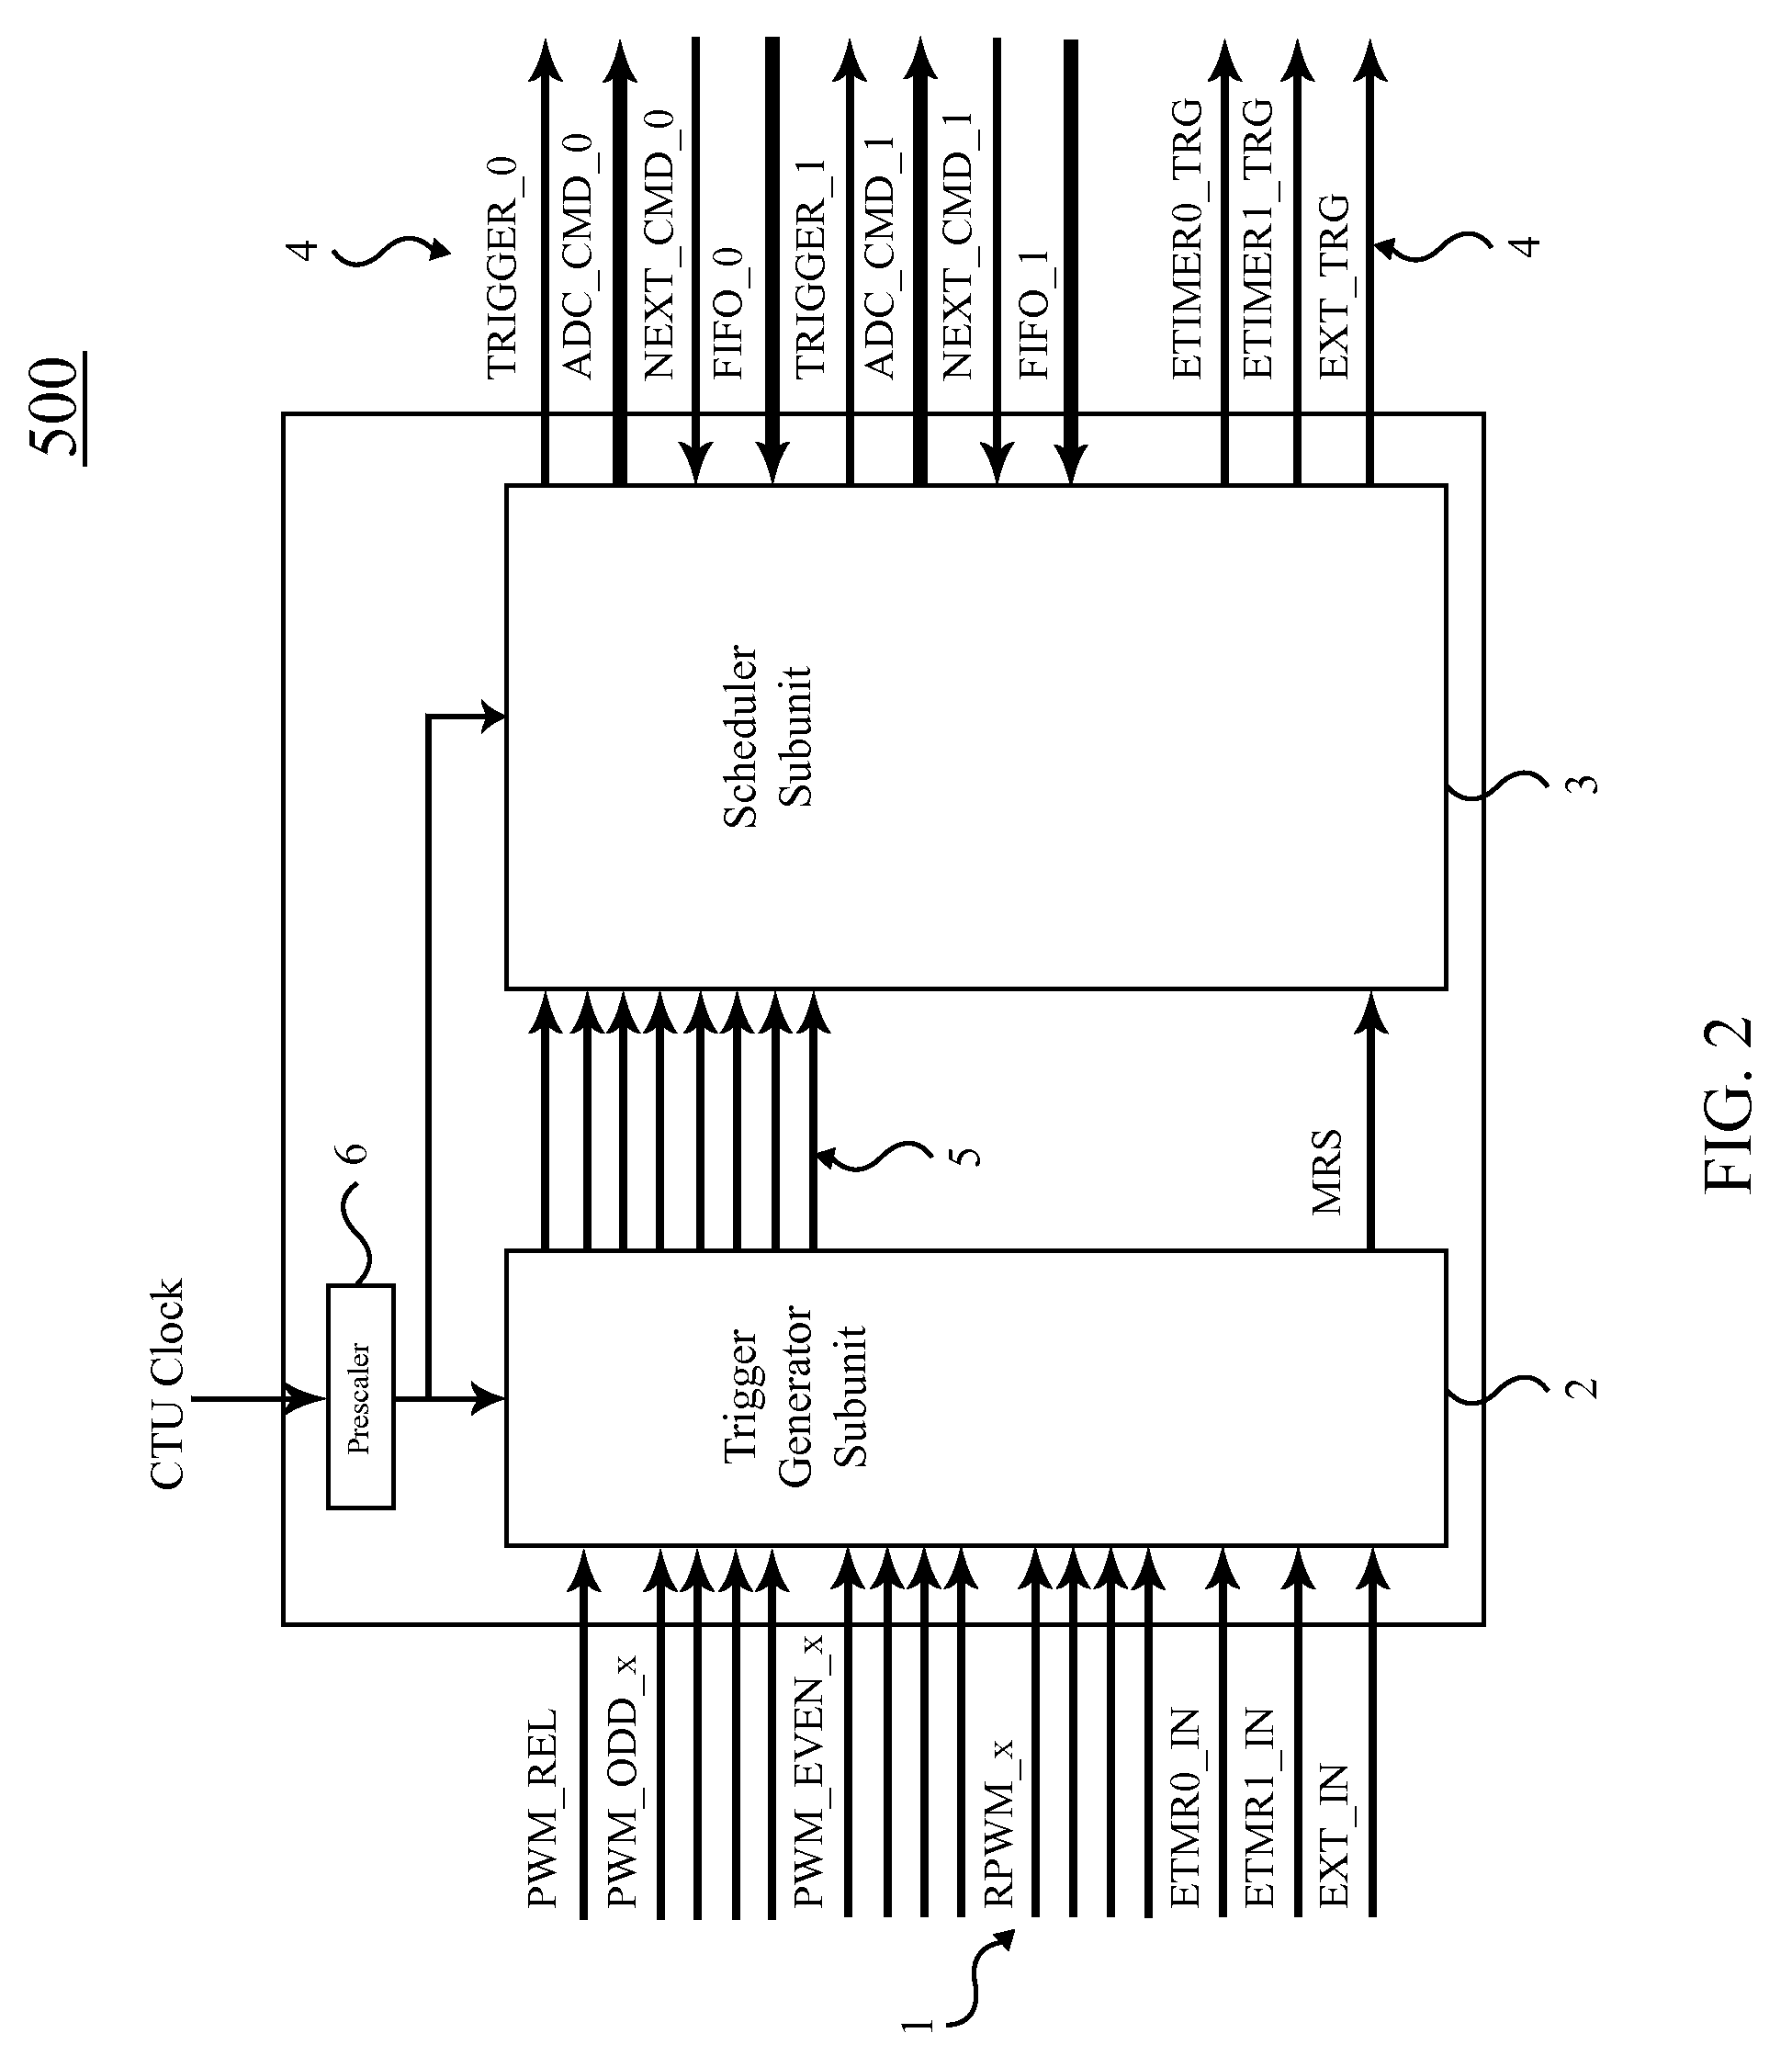 Processor system employing a signal acquisition managing device and signal acquisition managing device